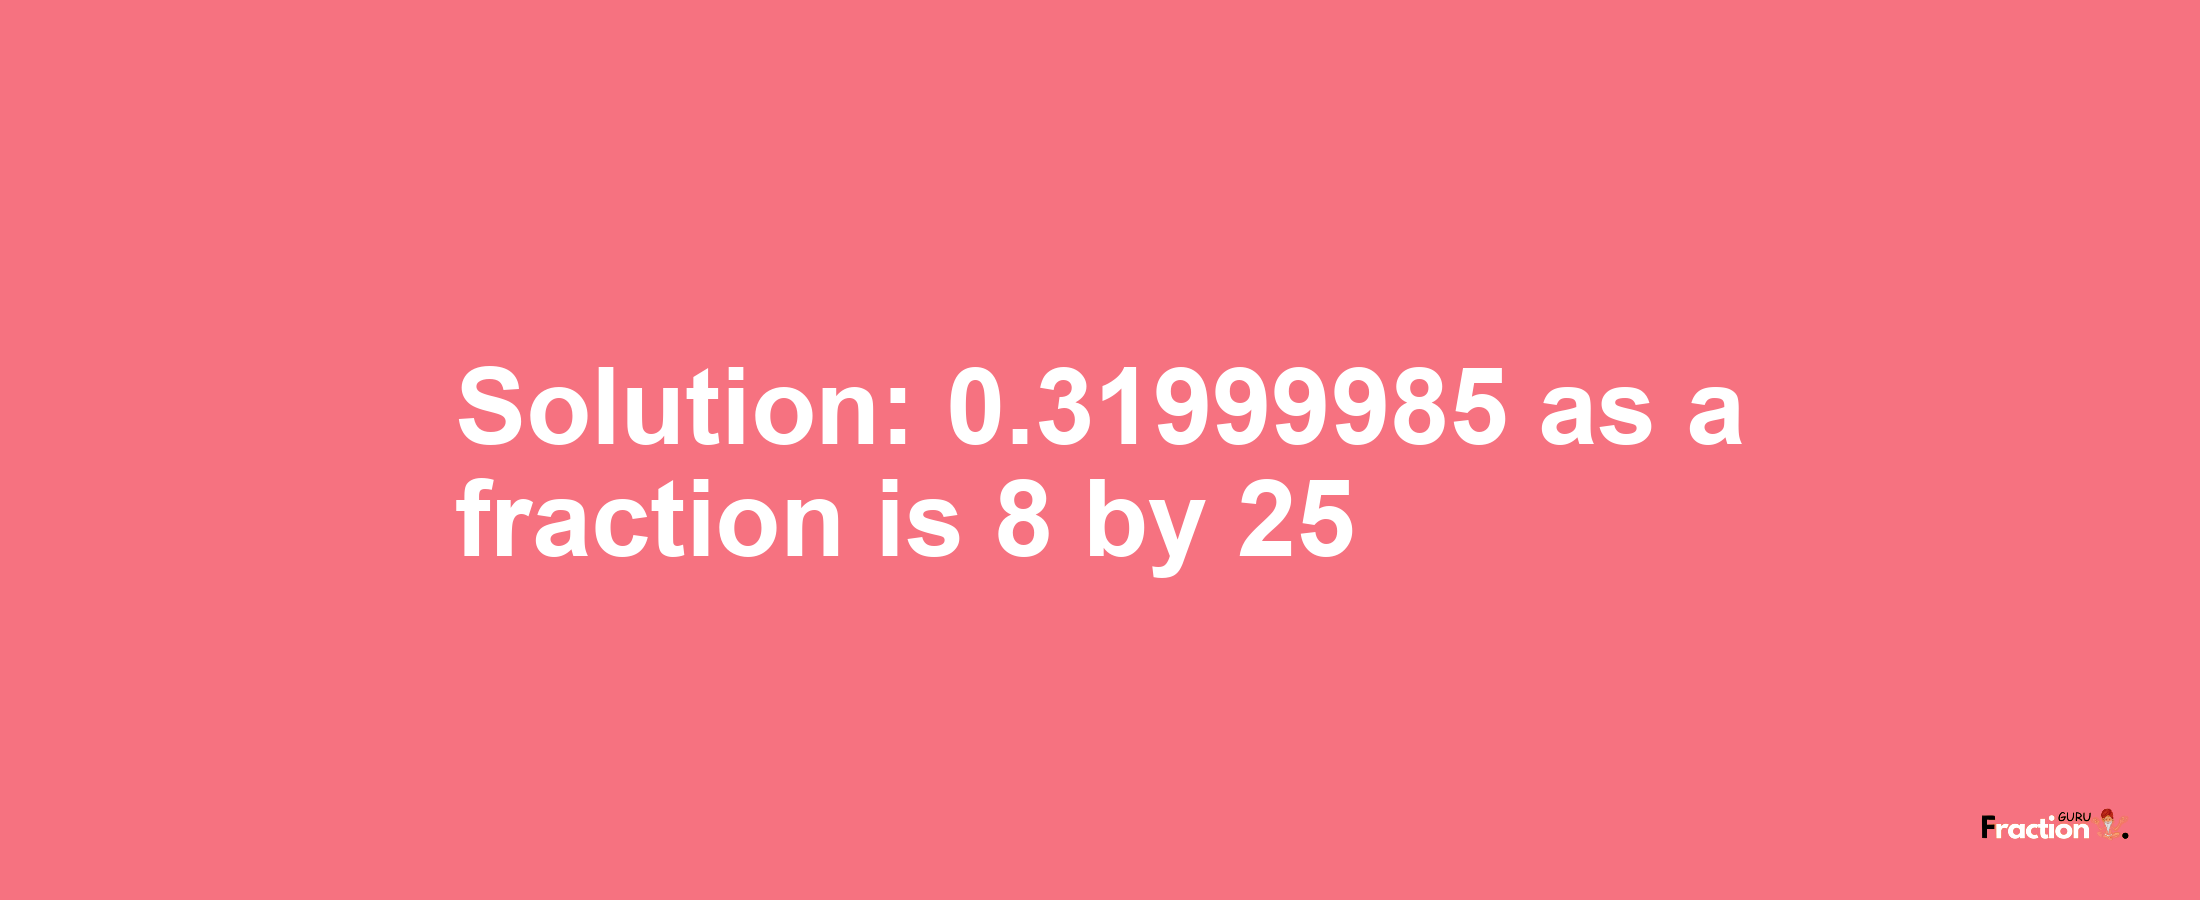 Solution:0.31999985 as a fraction is 8/25